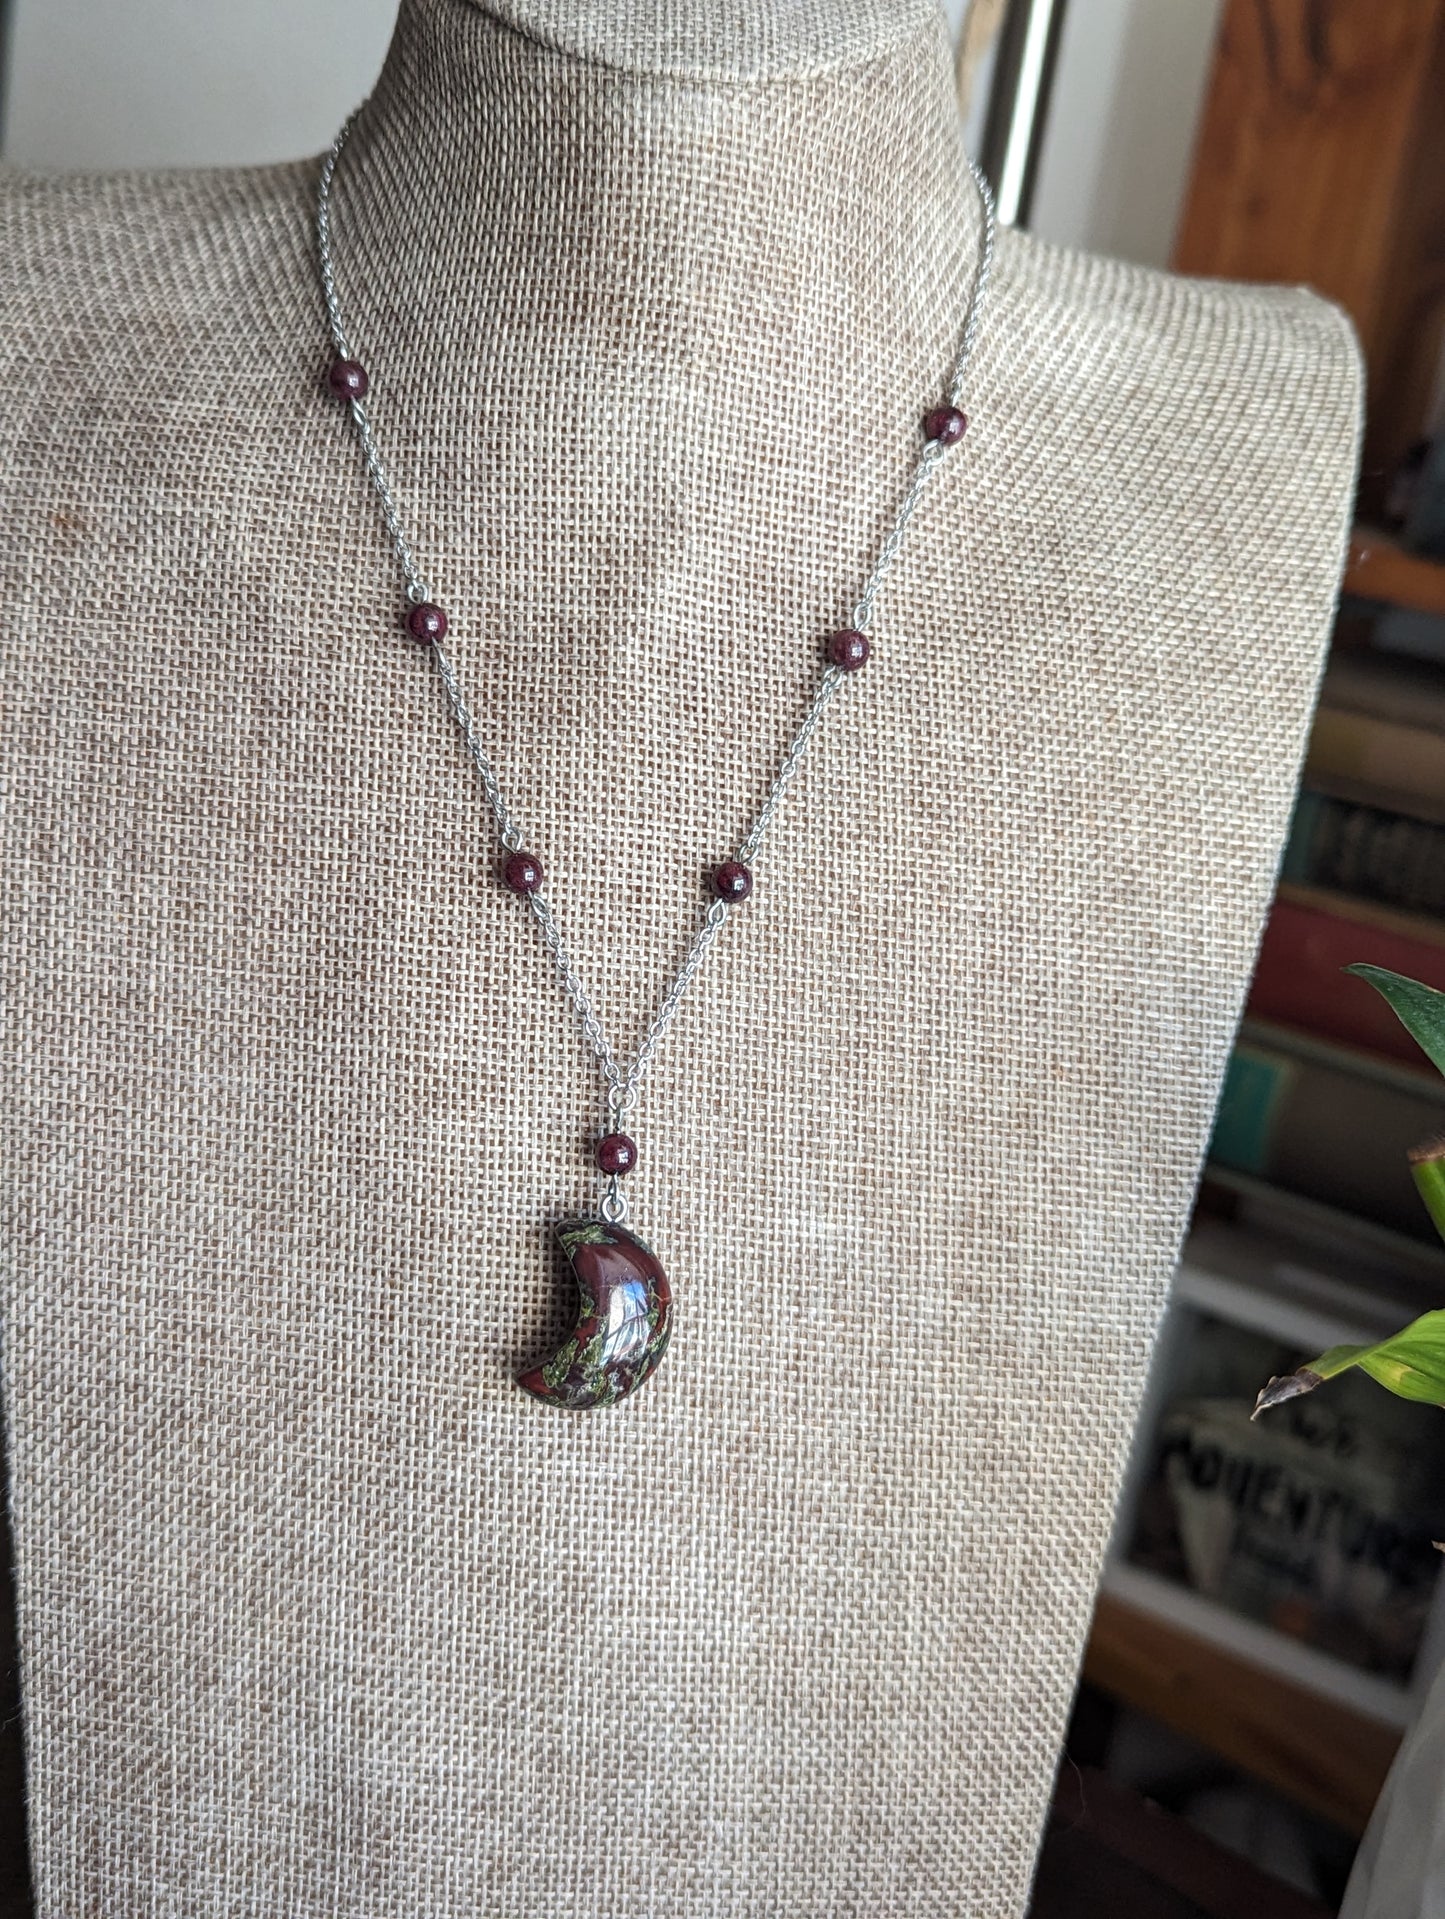 Dragons Blood Crescent Moon and Garnet on Stainless Necklace